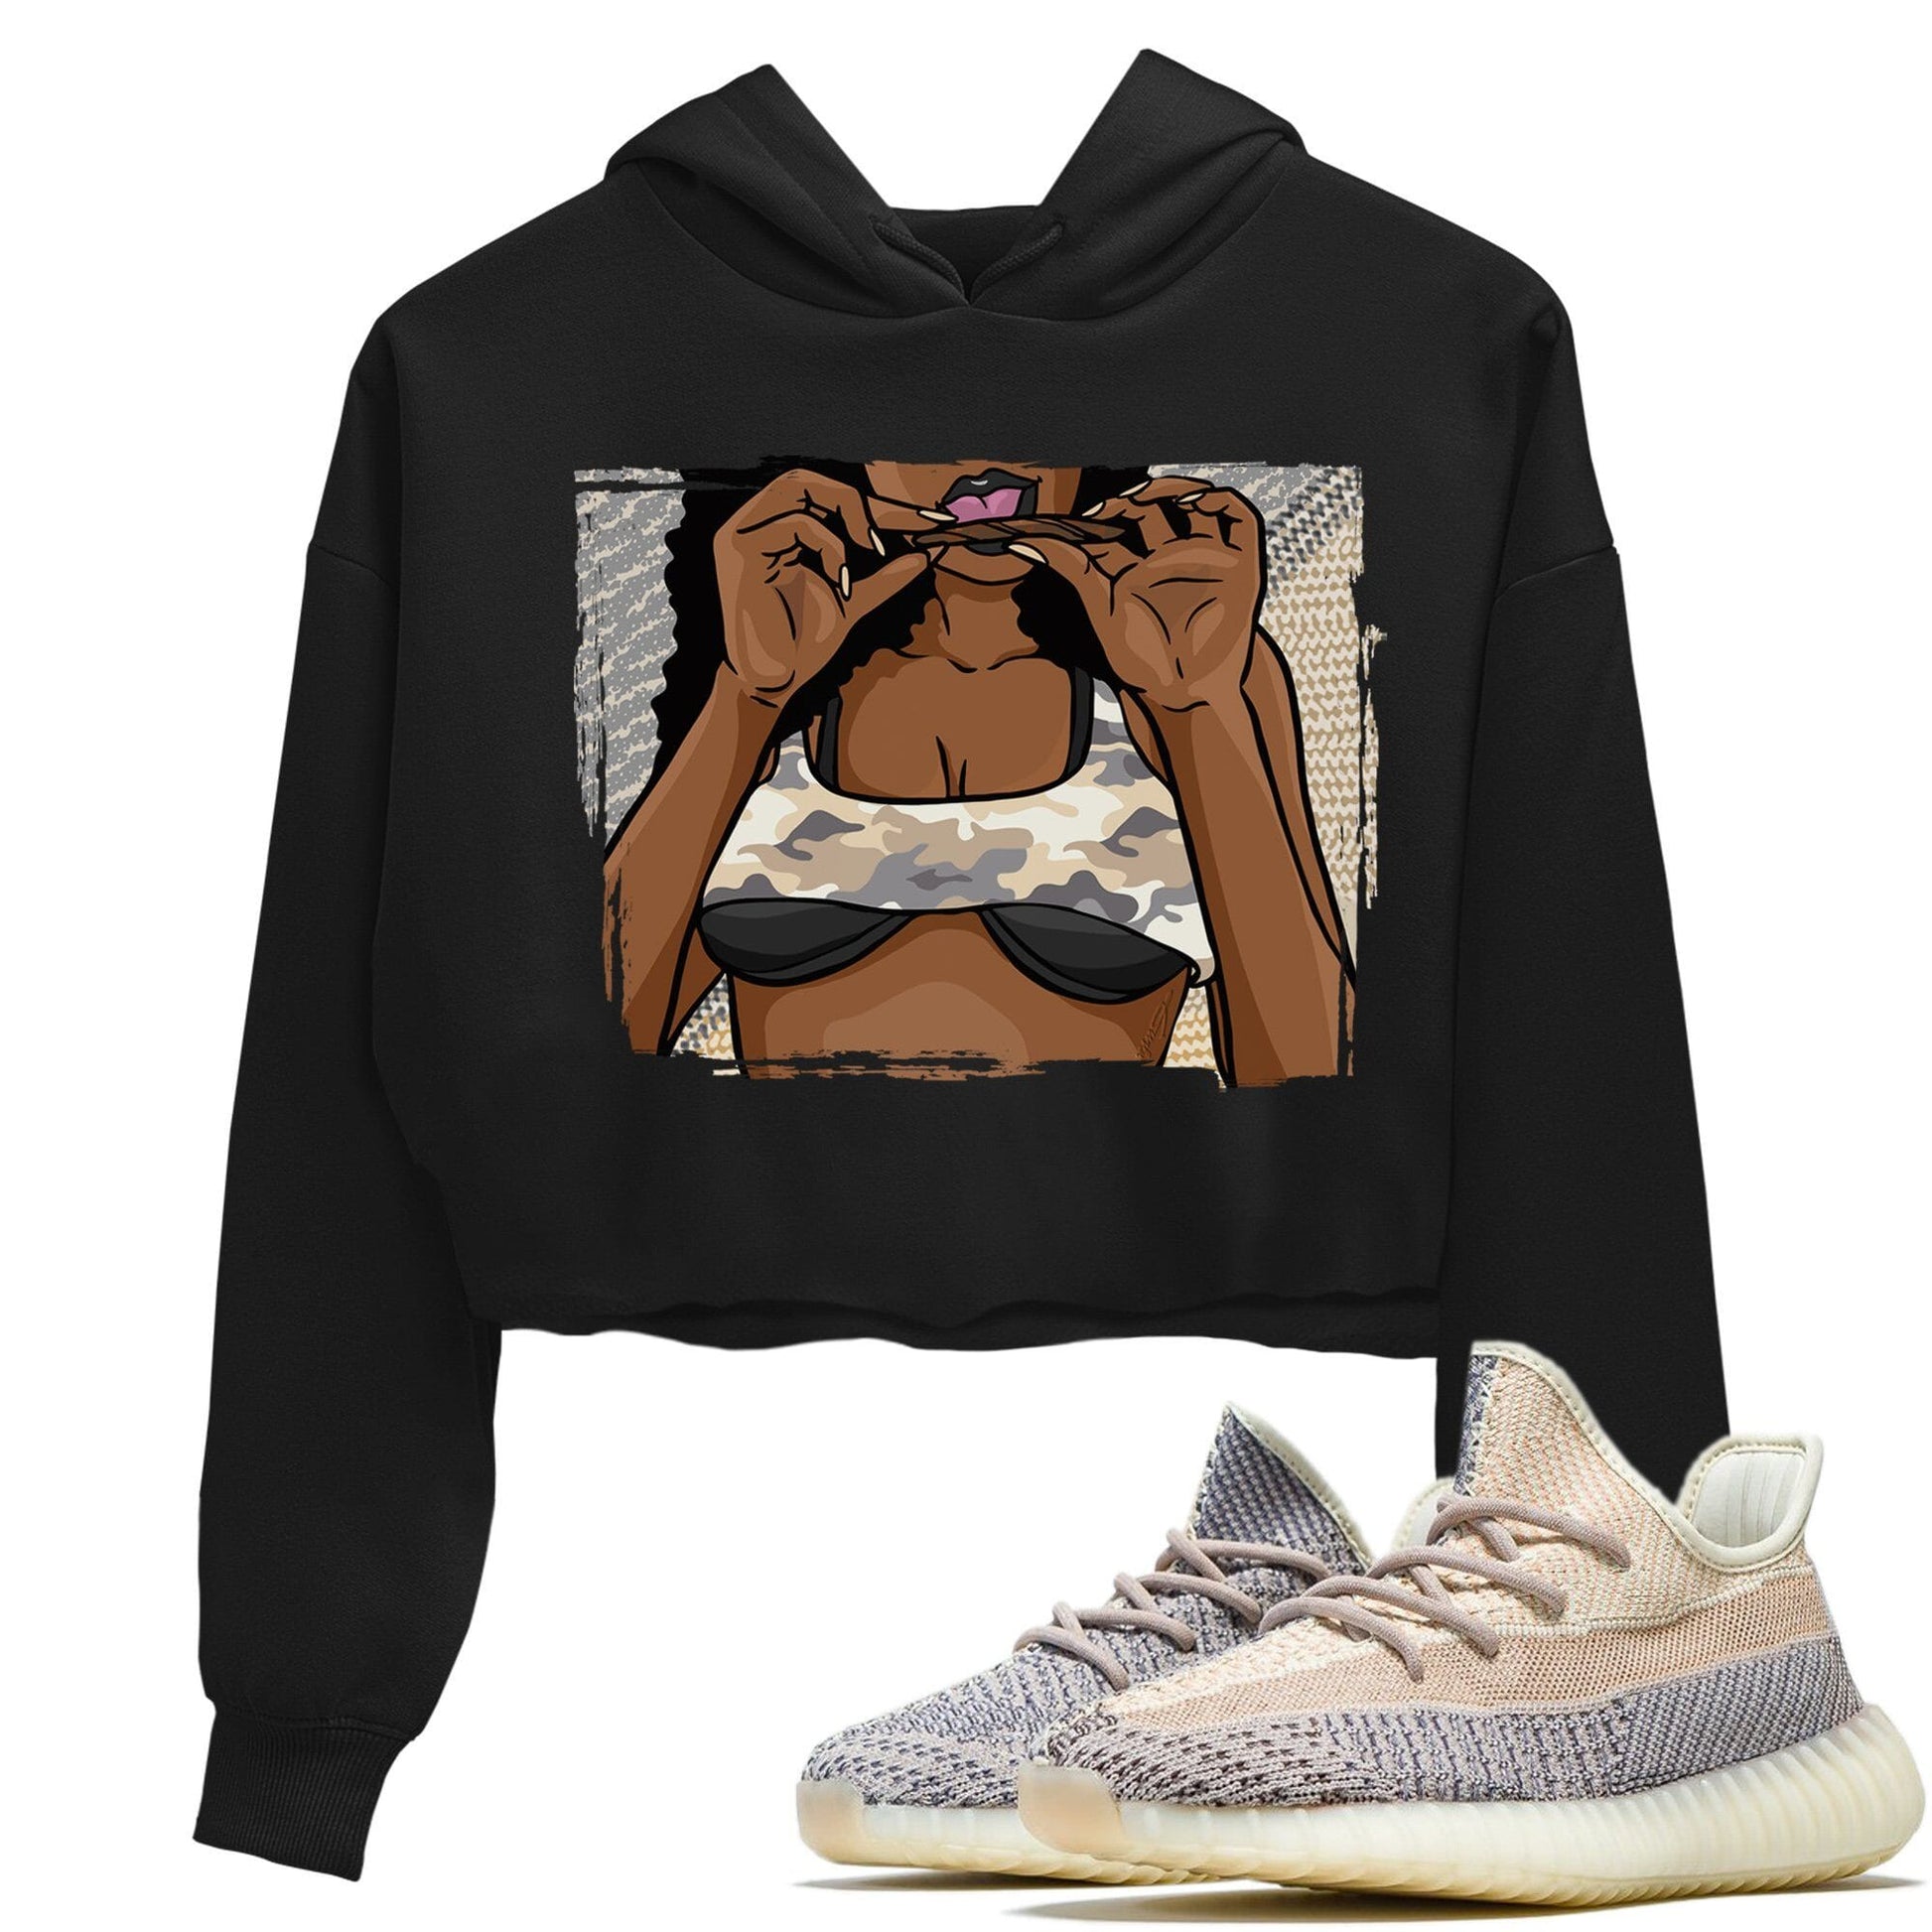 Yeezy 350 Ash Pearl Sneaker Match Tees Roll Up Sneaker Tees Yeezy 350 Ash Pearl Sneaker Release Tees Women's Shirts